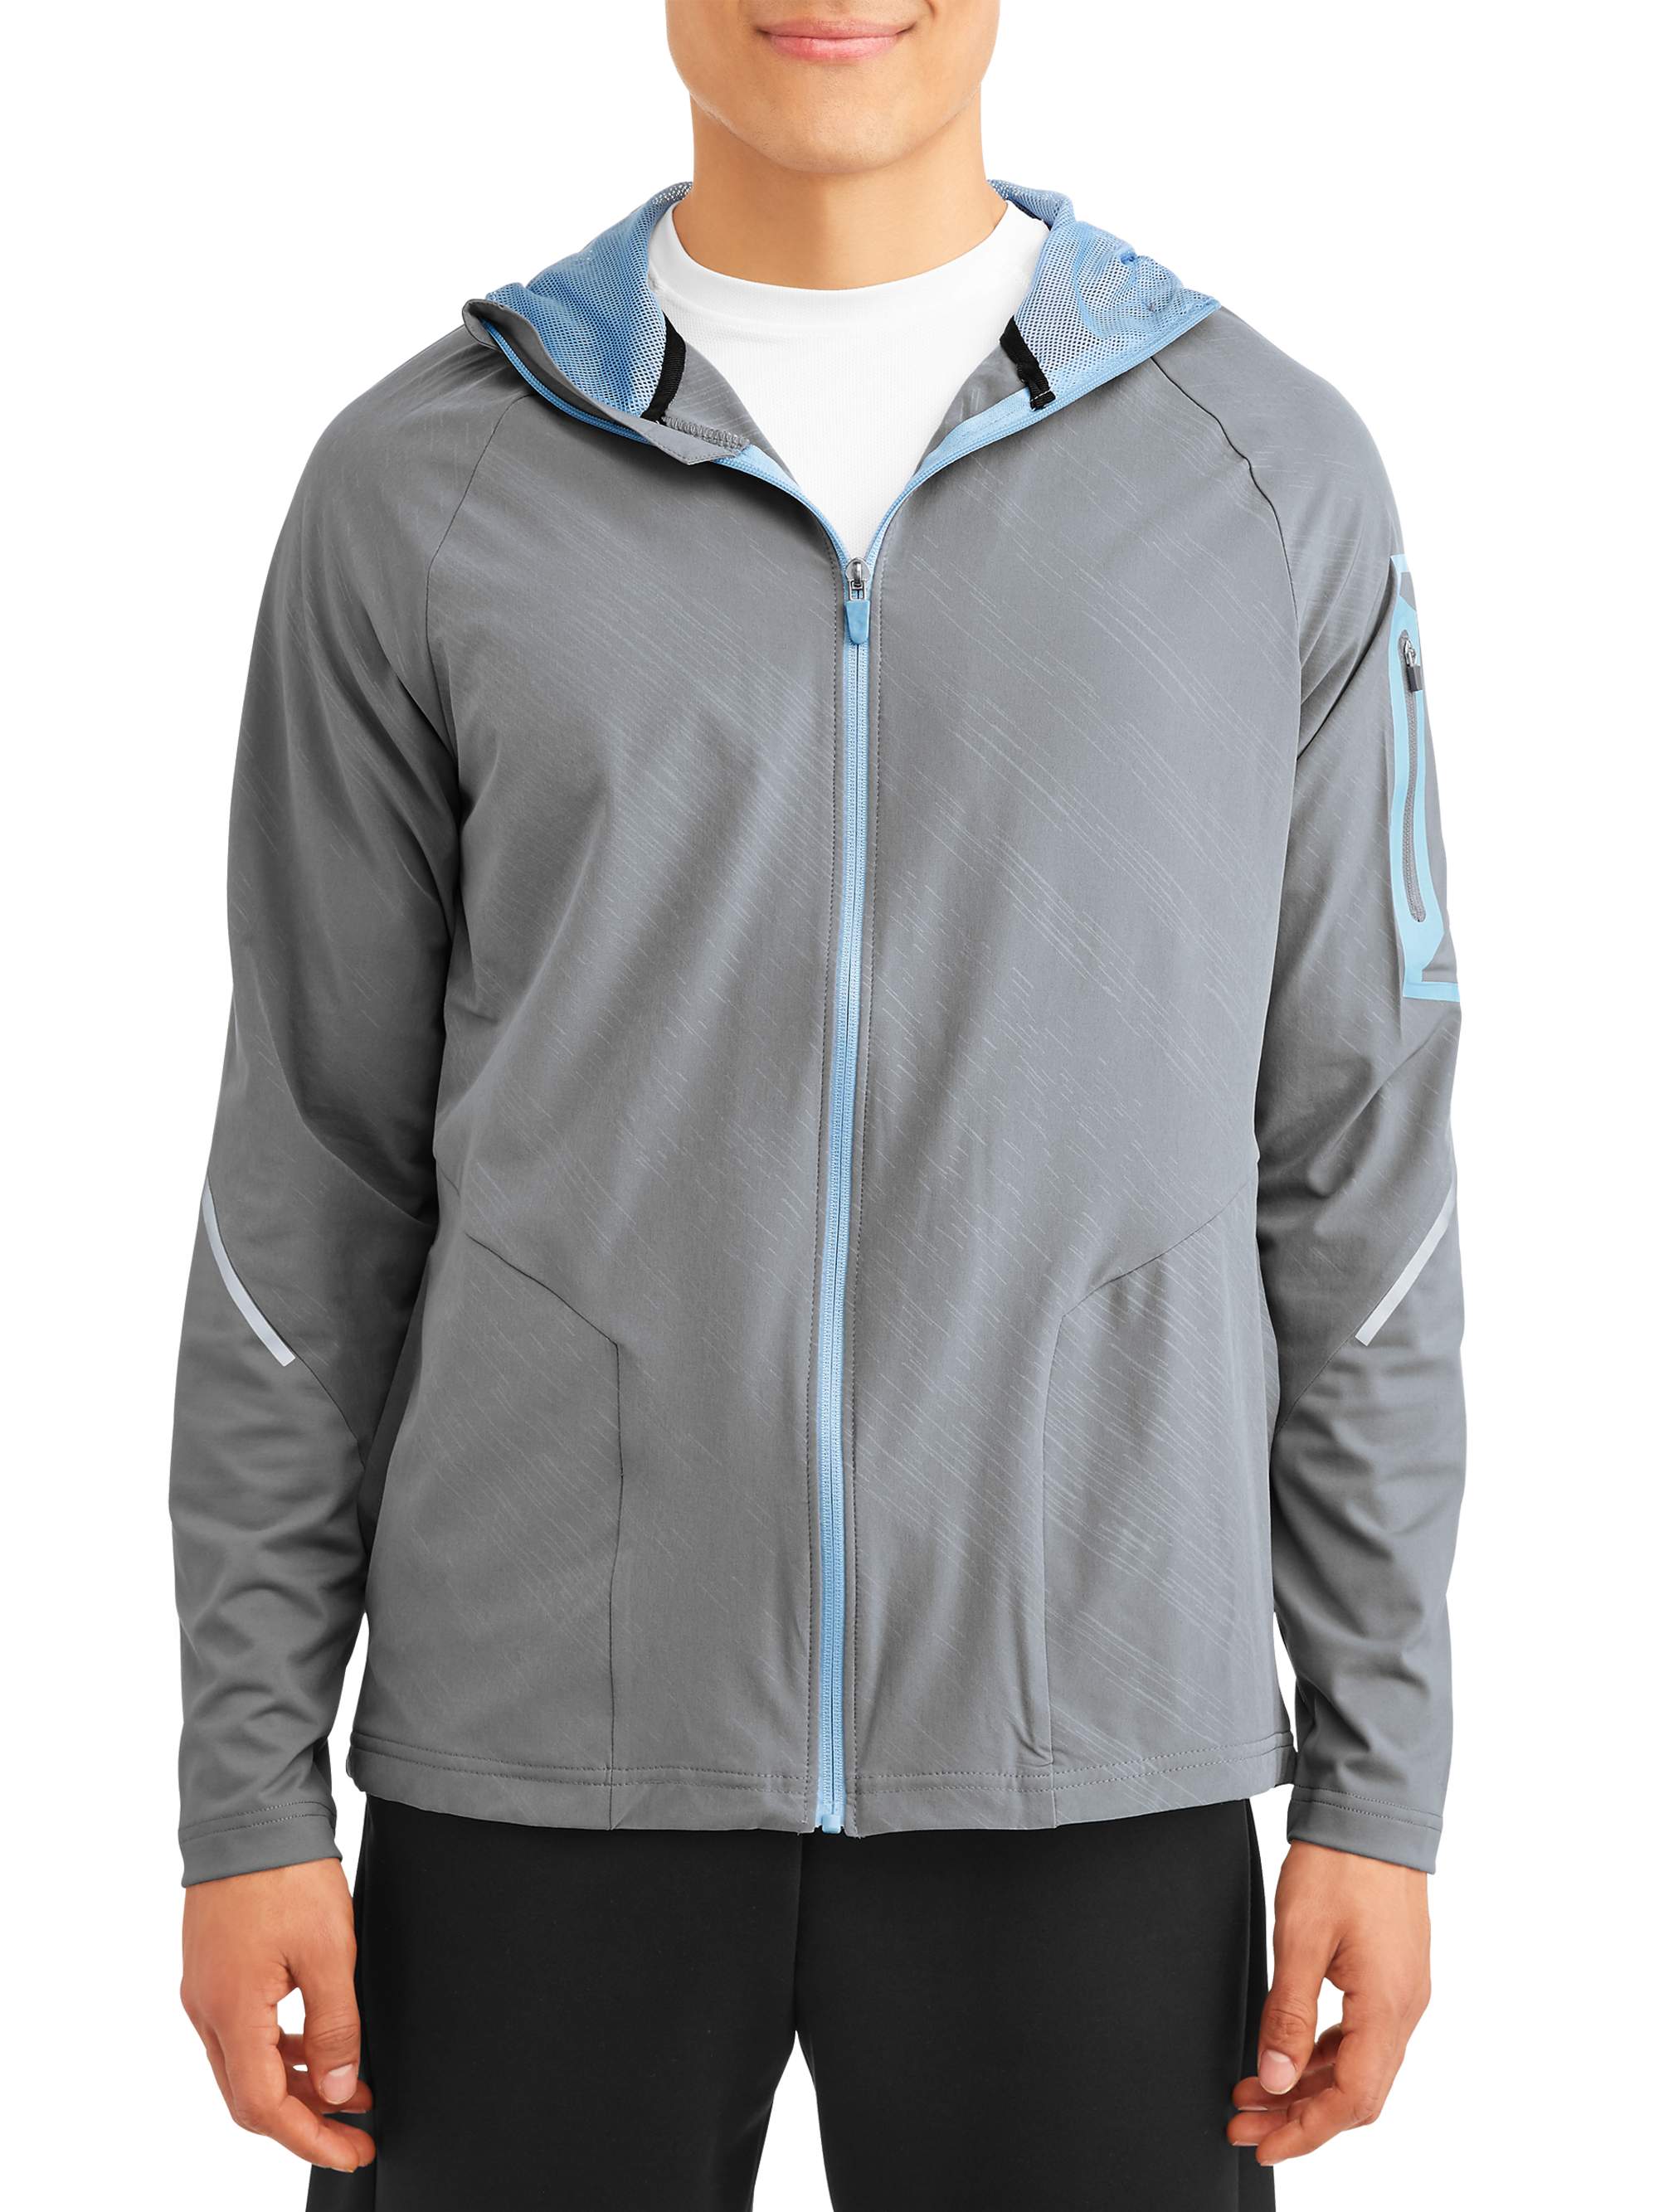 Russell Exclusive Men's Core Performance Jacket - image 1 of 4